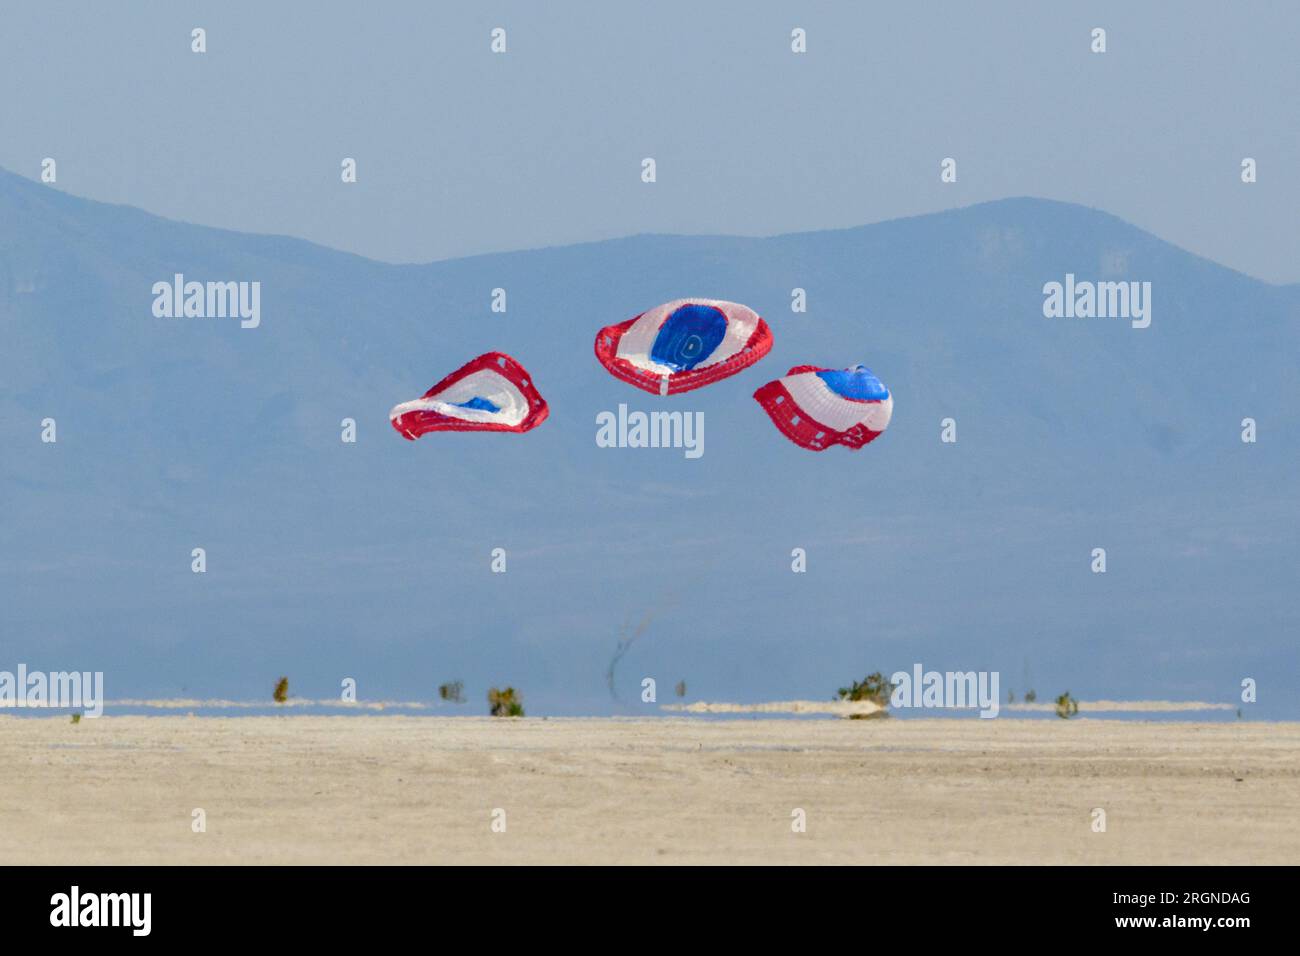 Reportage: Boeing Orbital Flight Test-2 Landing (May 2022) - Boeing’s CST-100 Starliner spacecraft lands at White Sands Missile Range’s Space Harbor, Wednesday, May 25, 2022, in New Mexico. Boeing’s Orbital Flight Test-2 (OFT-2) is Starliner’s second uncrewed flight test to the International Space Station as part of NASA's Commercial Crew Program. Stock Photo